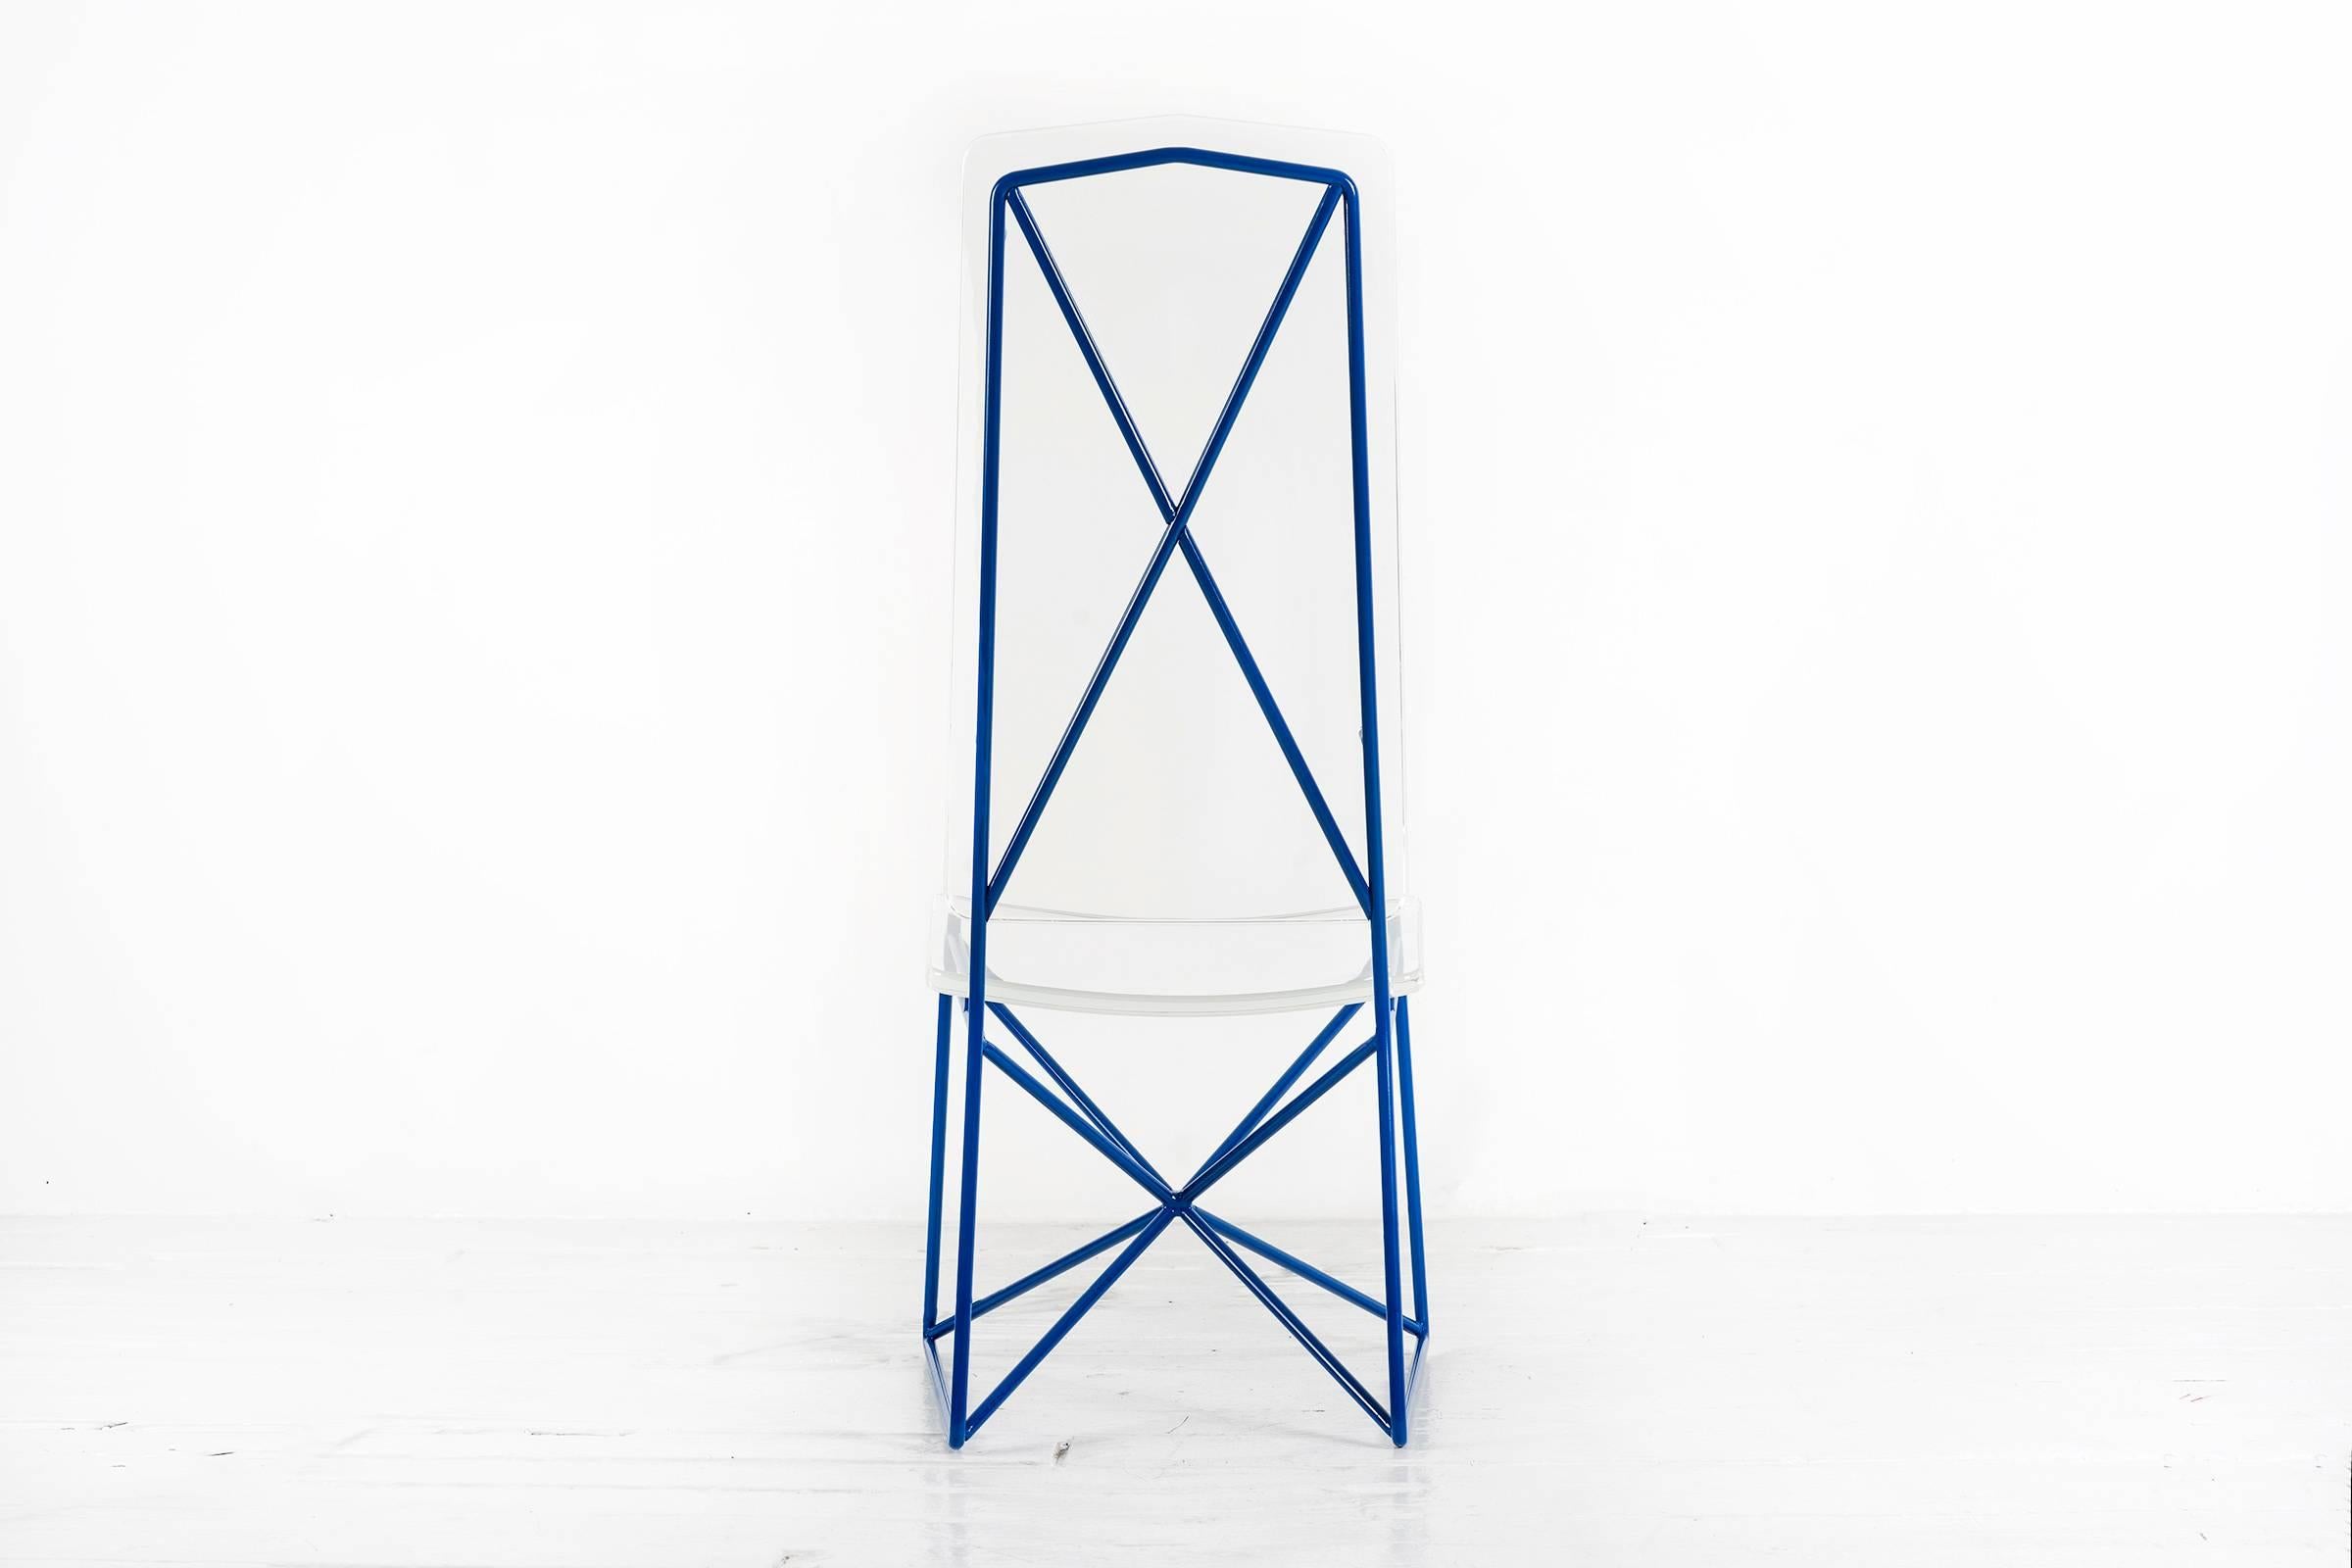 Powder-Coated Arturo Pani Prototype Steel and Lucite Chairs For Sale